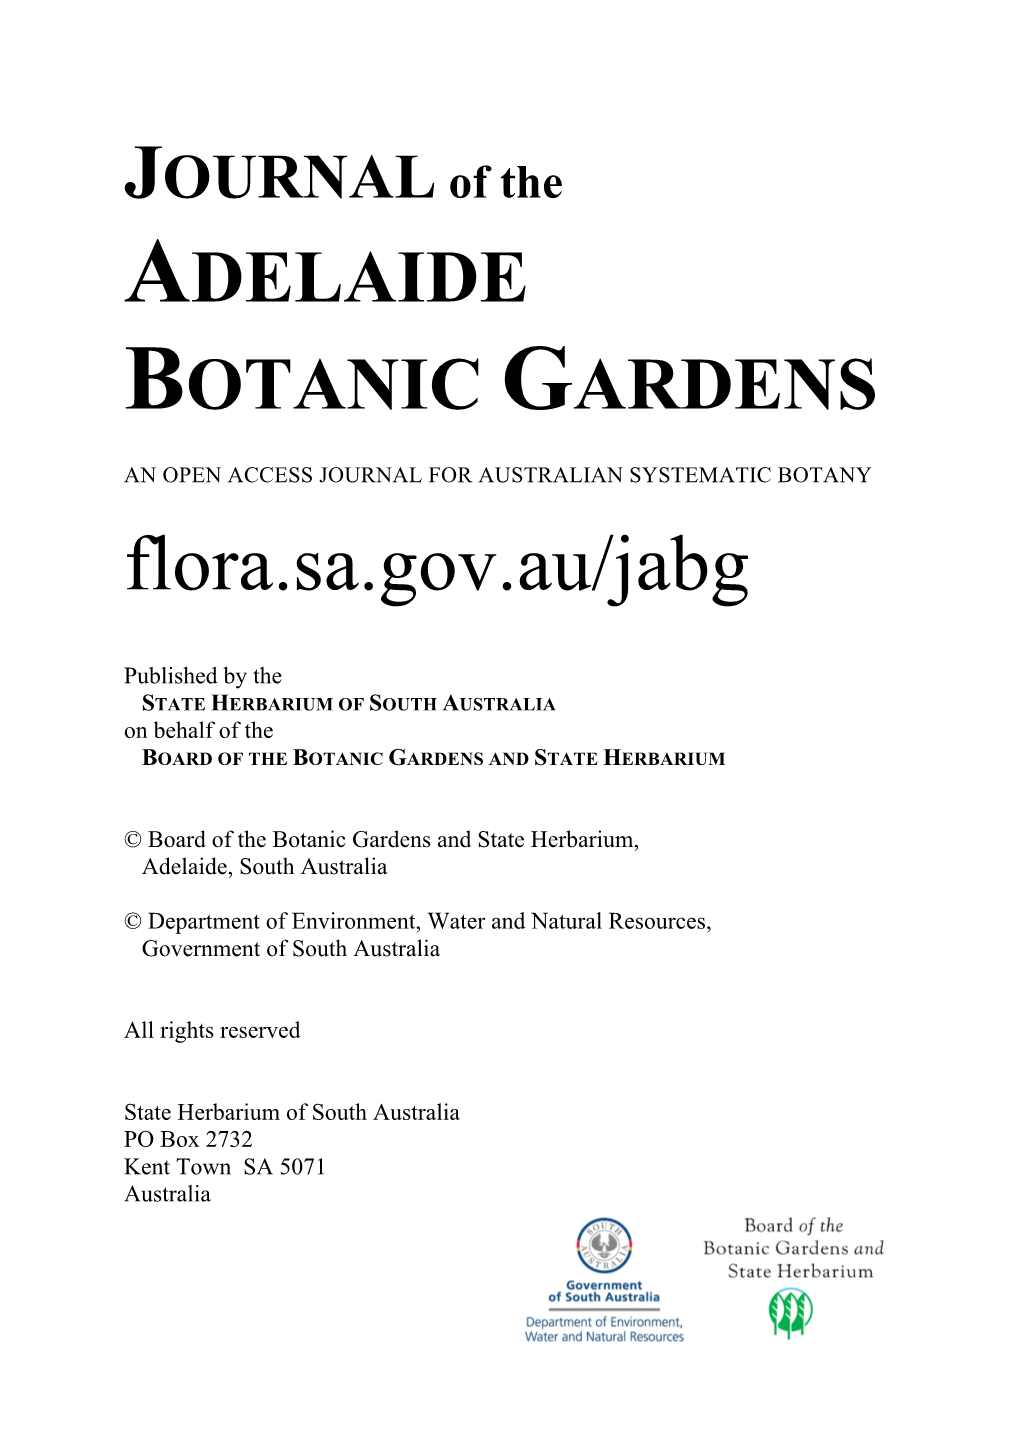 Two New Species of Polygalaceae from Central Australia L